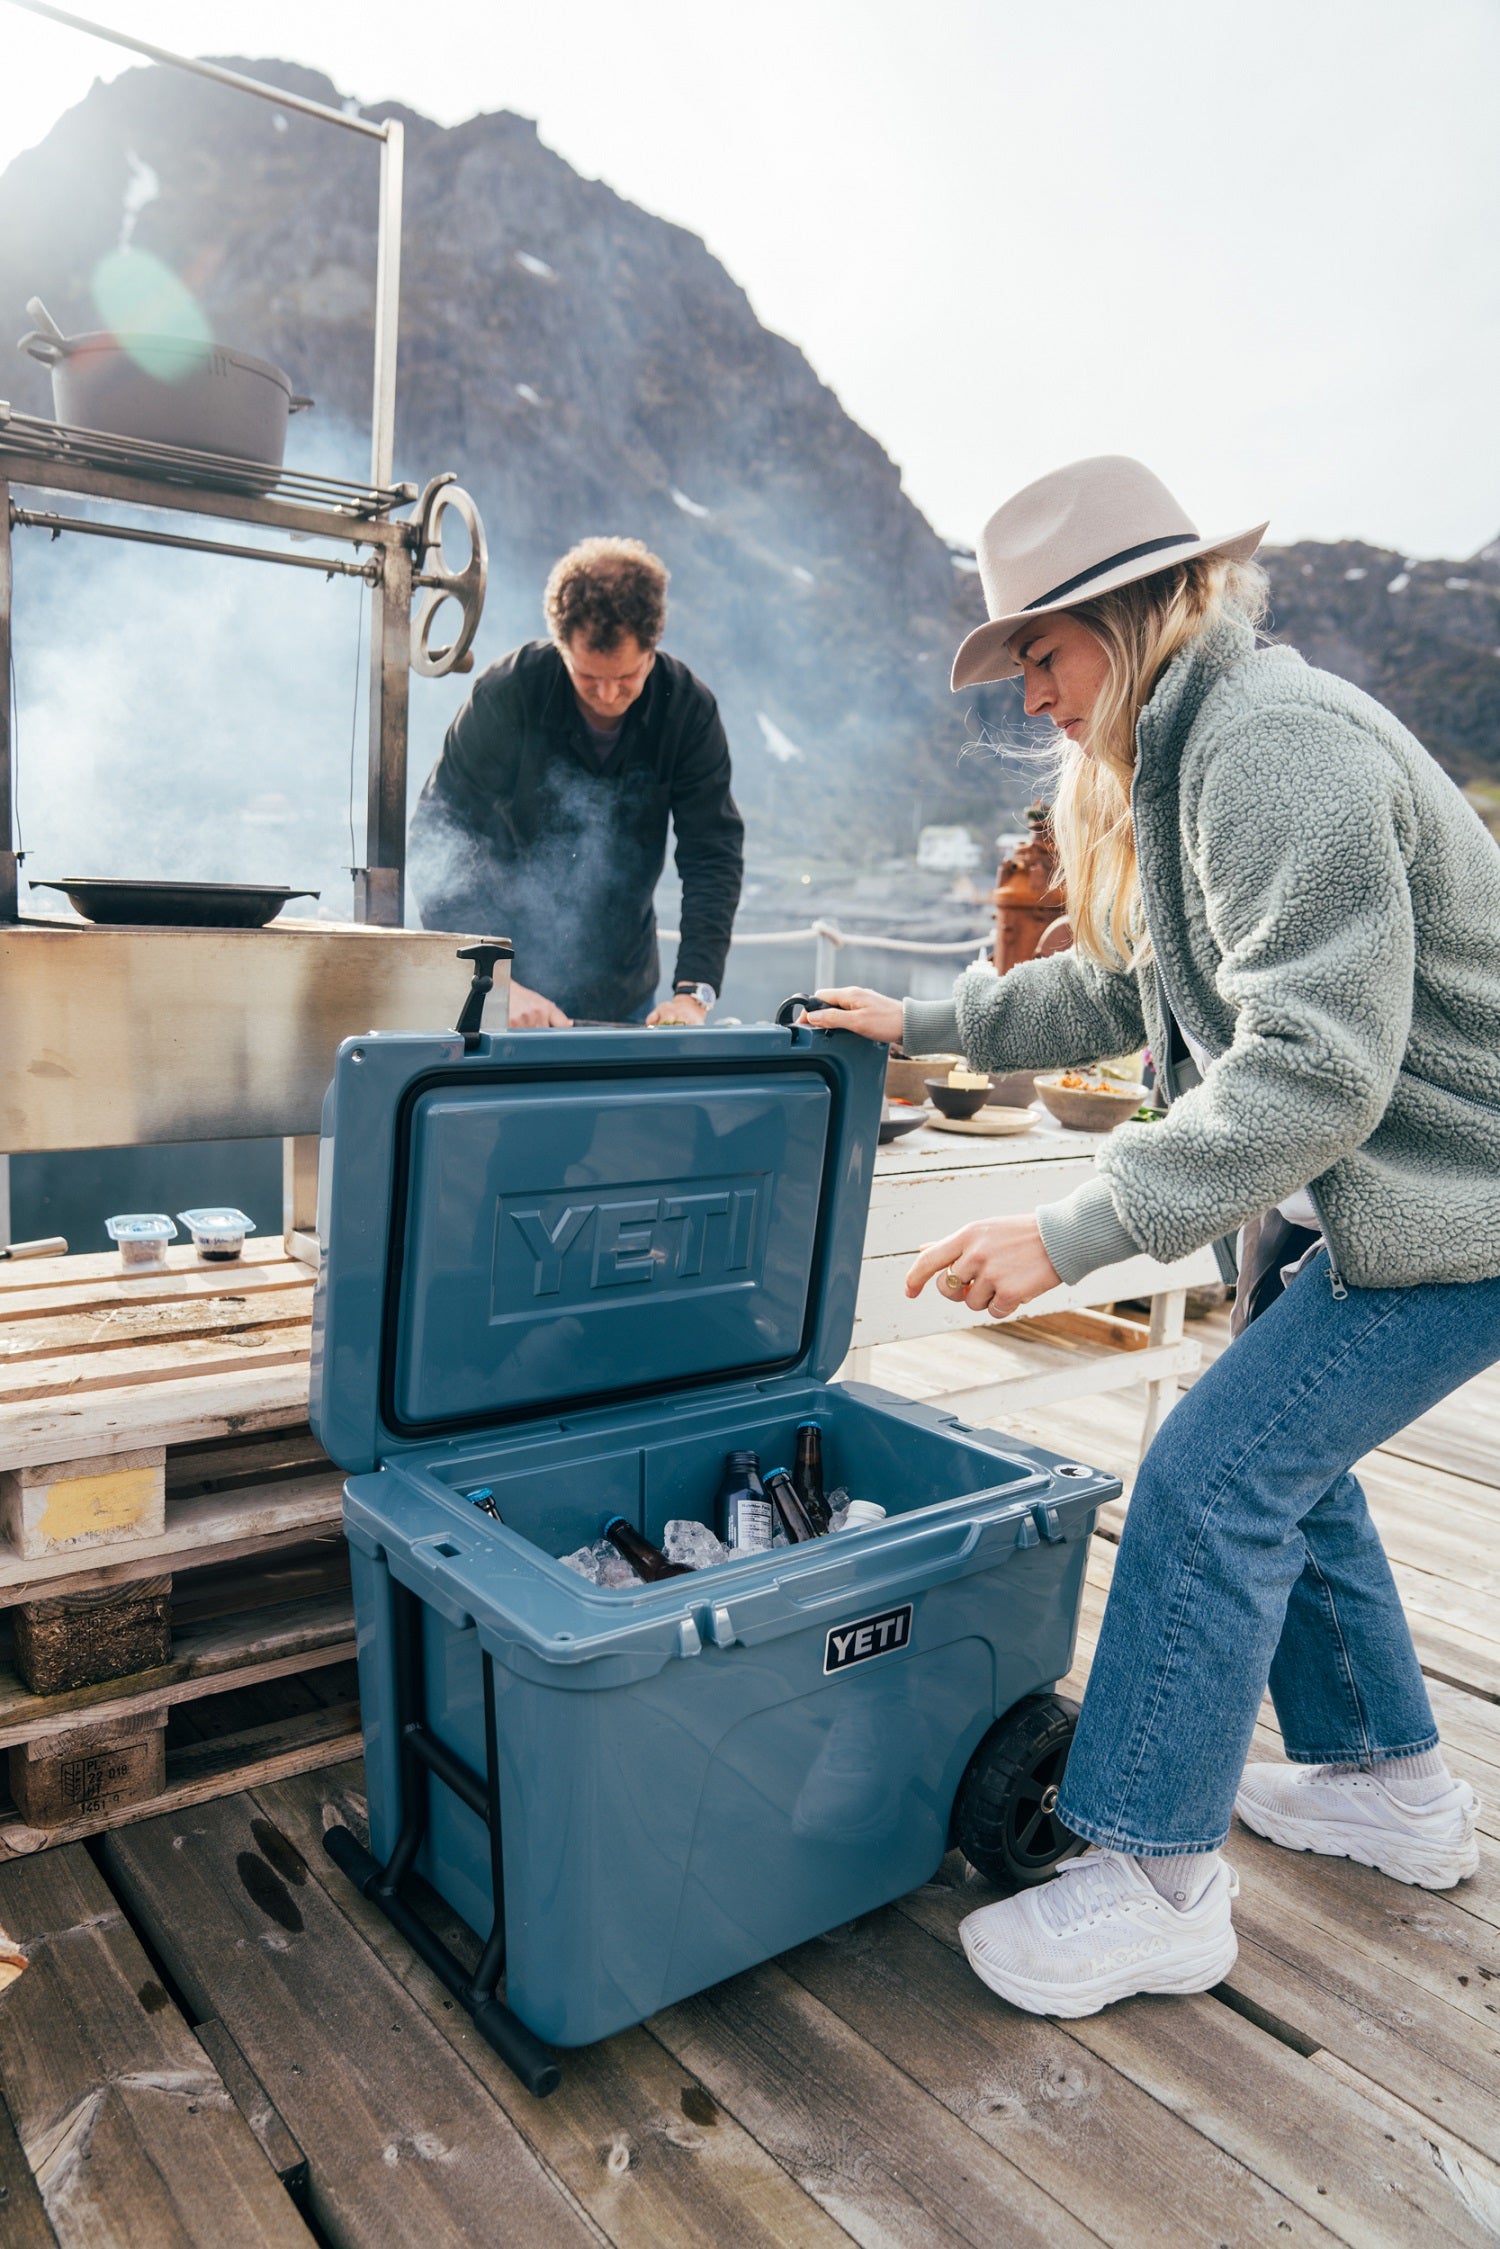 YETI - JUST LAUNCHED: The New Nordic Collection. Gear up